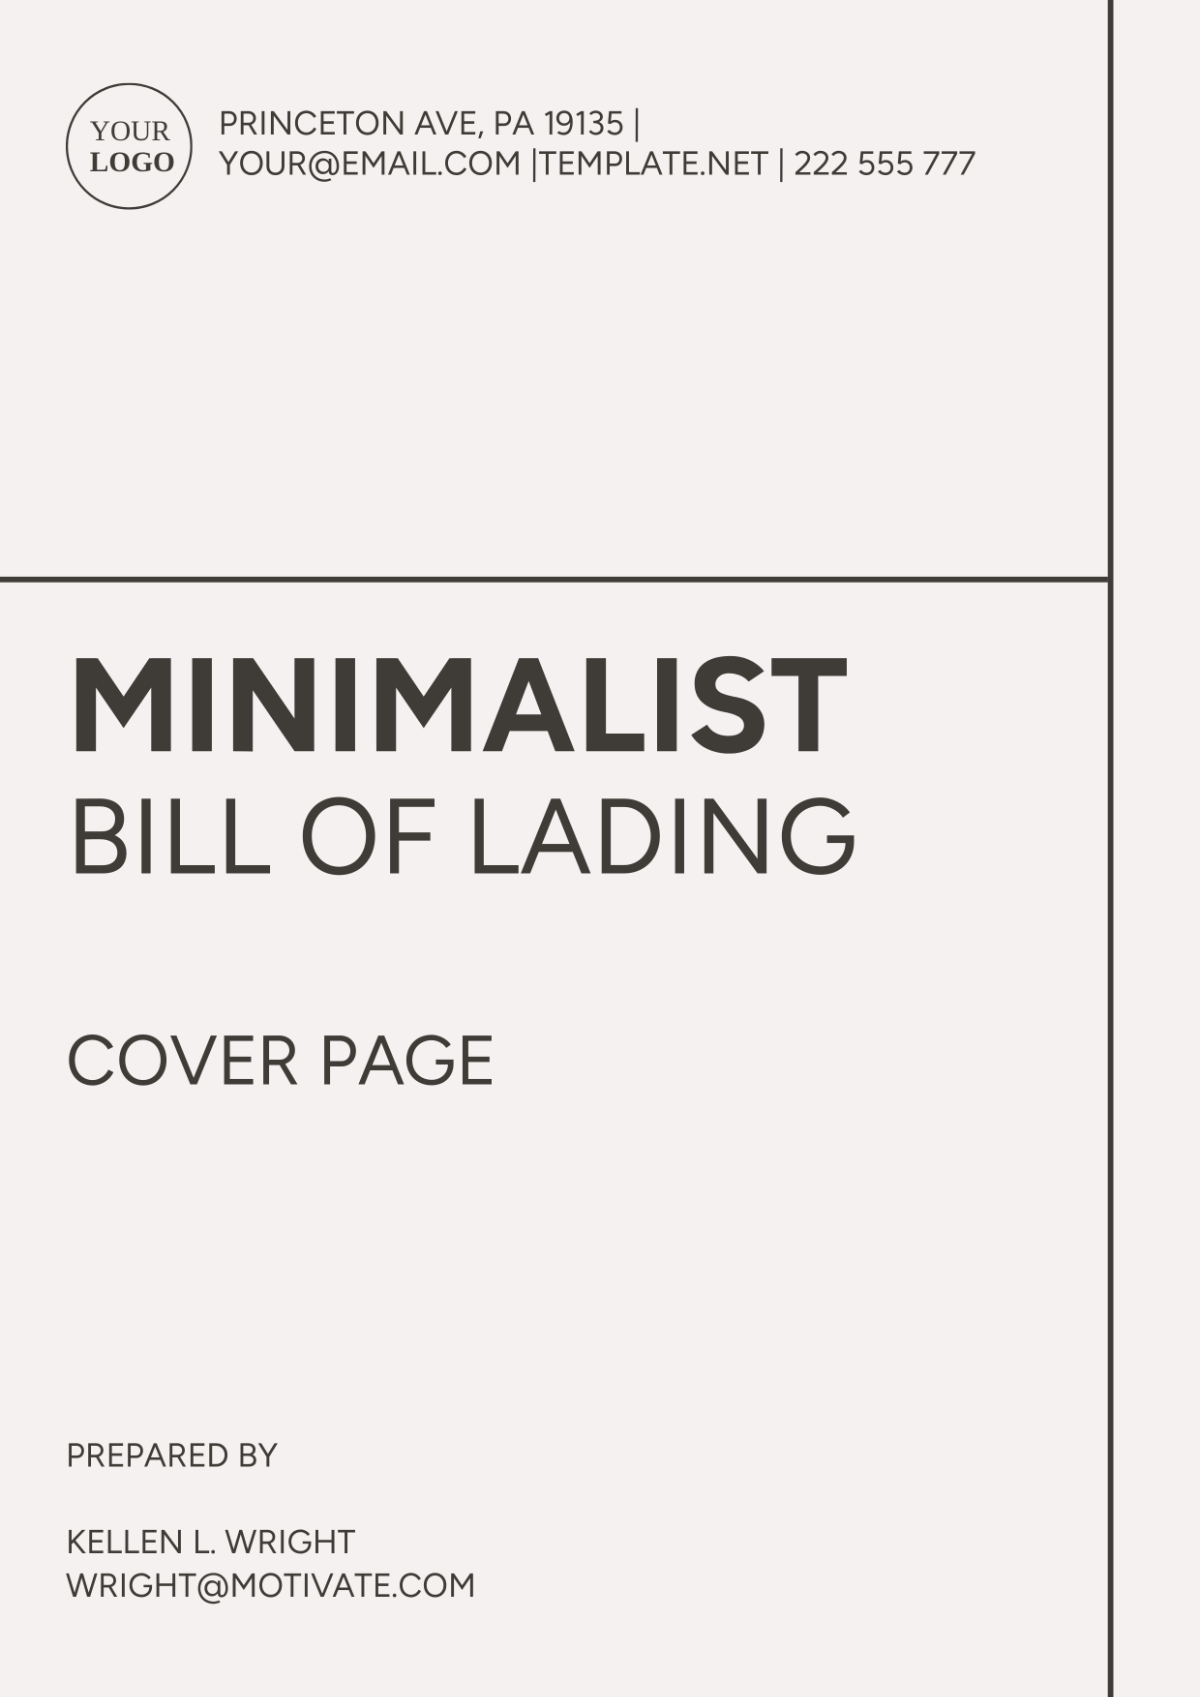 Minimalist Bill of Lading Cover Page